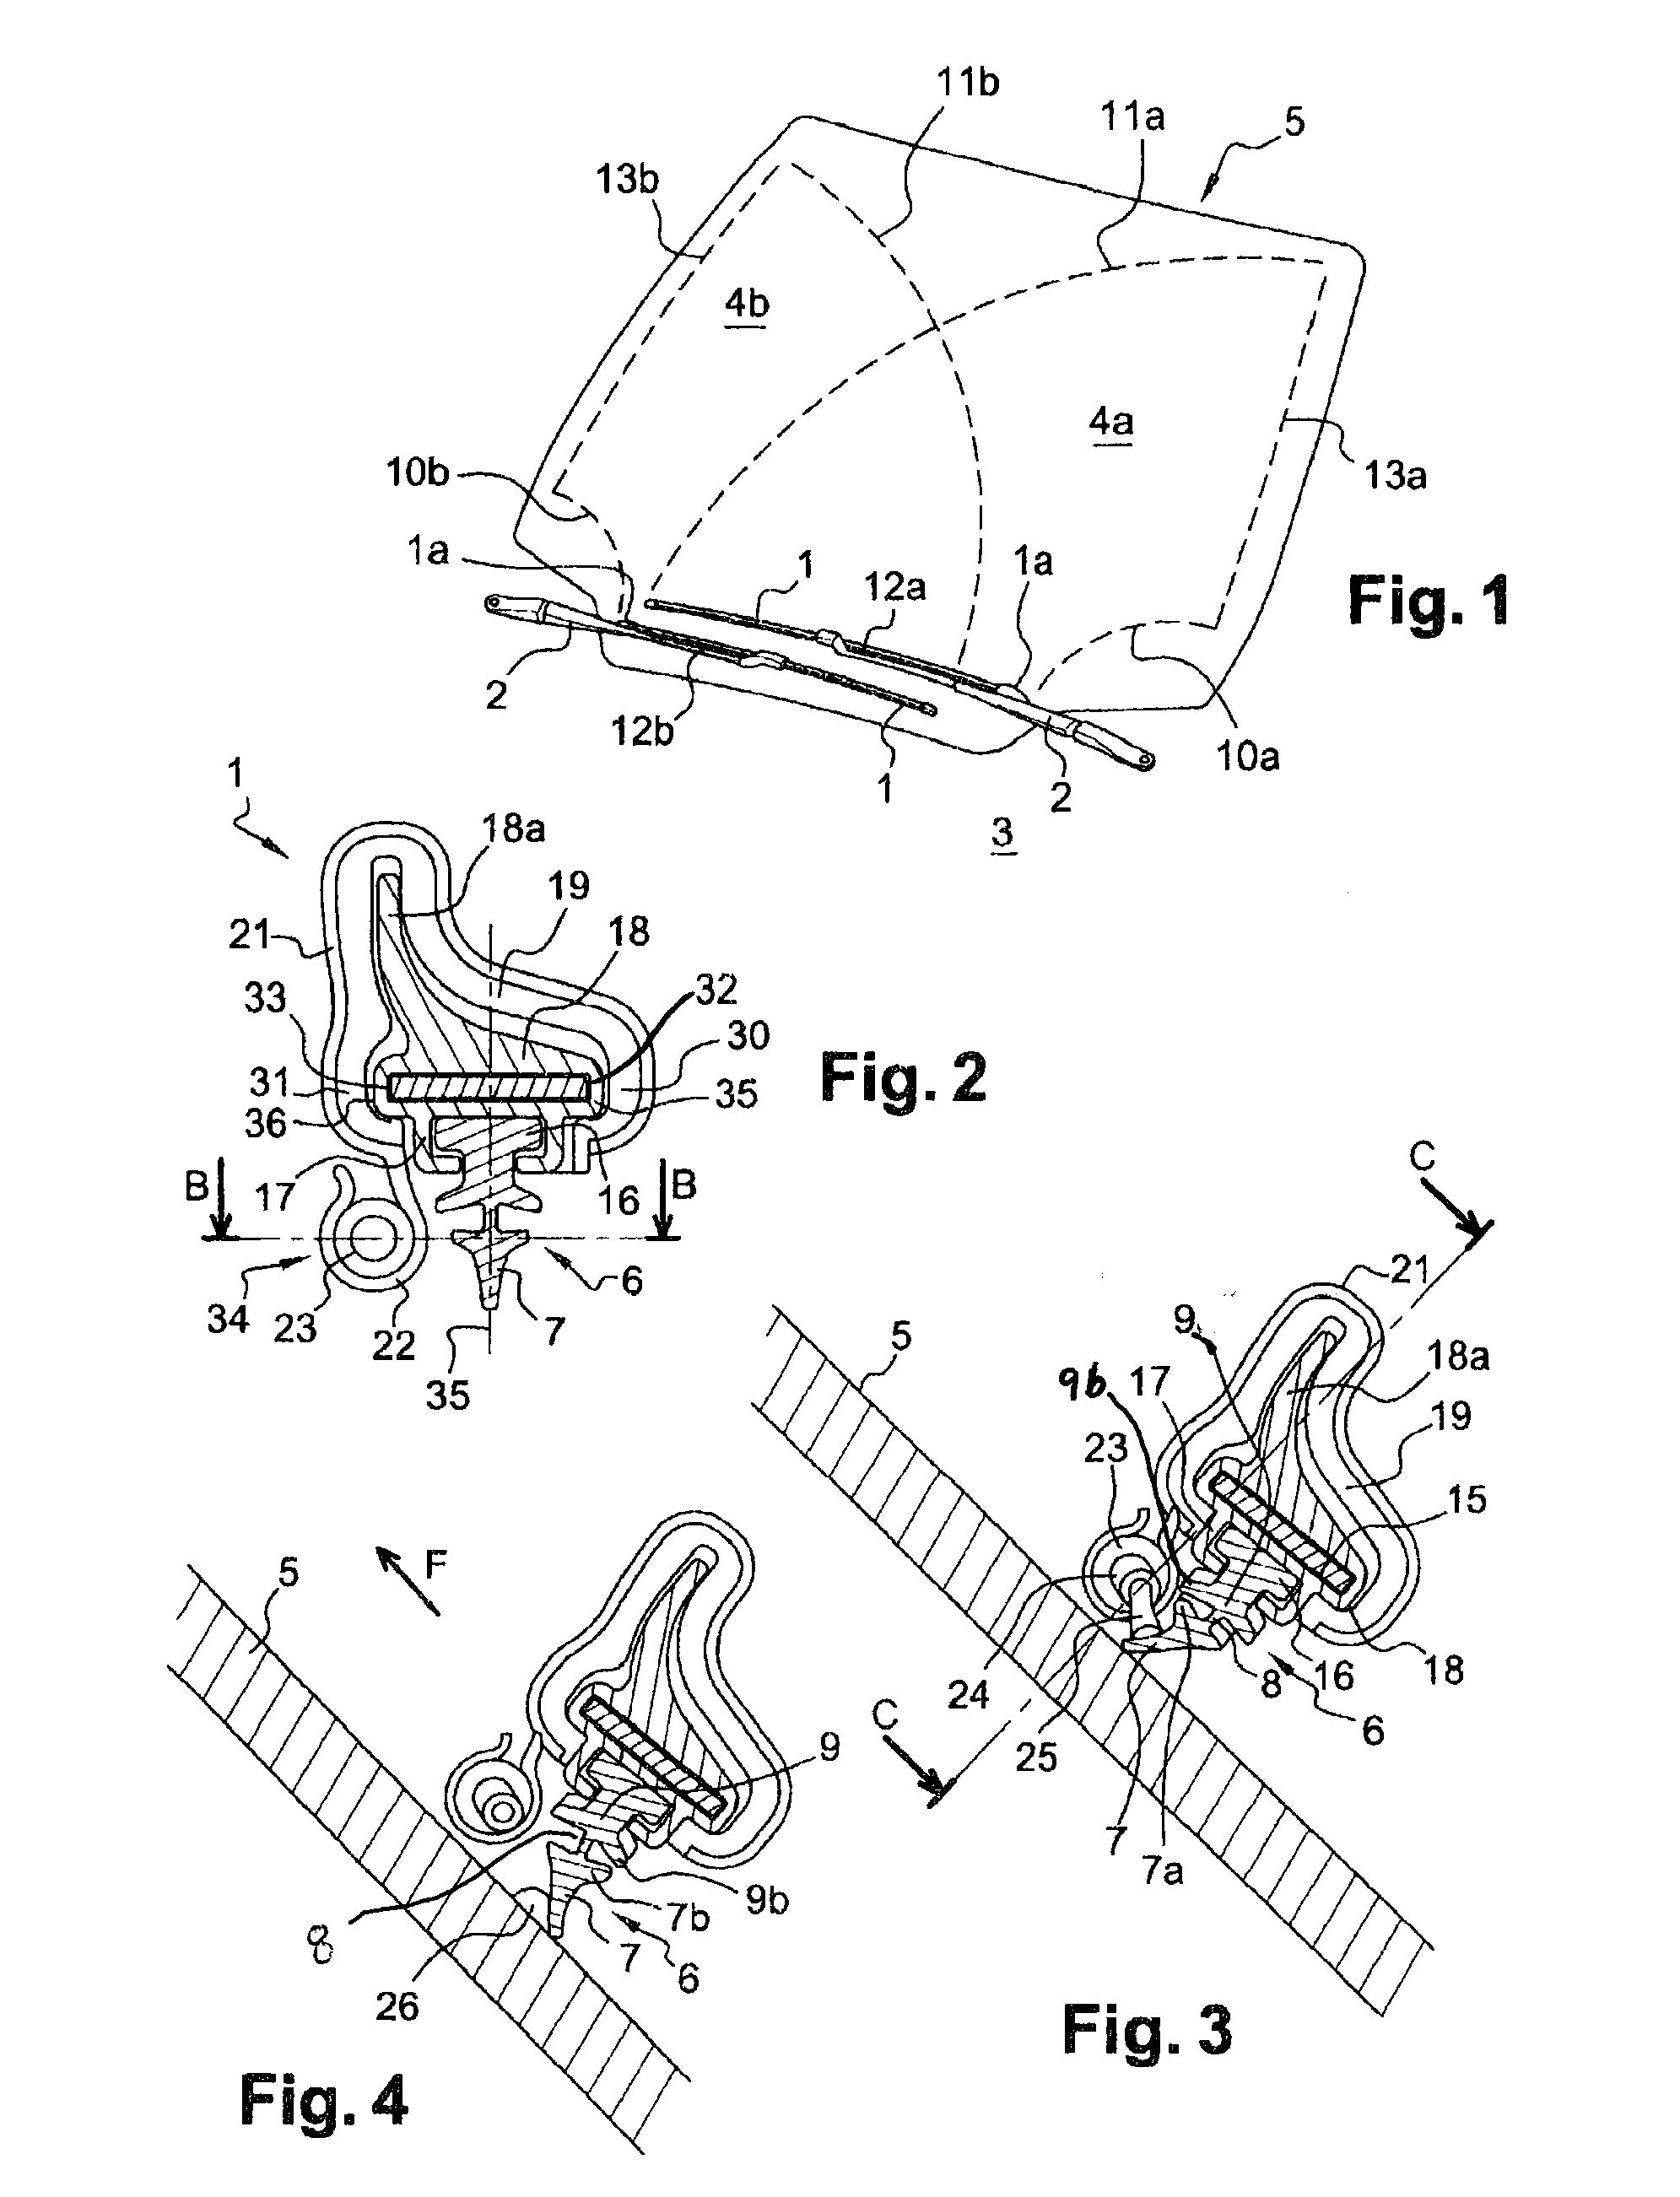 Windscreen Wiper Blade and Device for Wiping and Washing a Glazed Surface of a Motor Vehicle and Corresponding Wiping and Washing Method